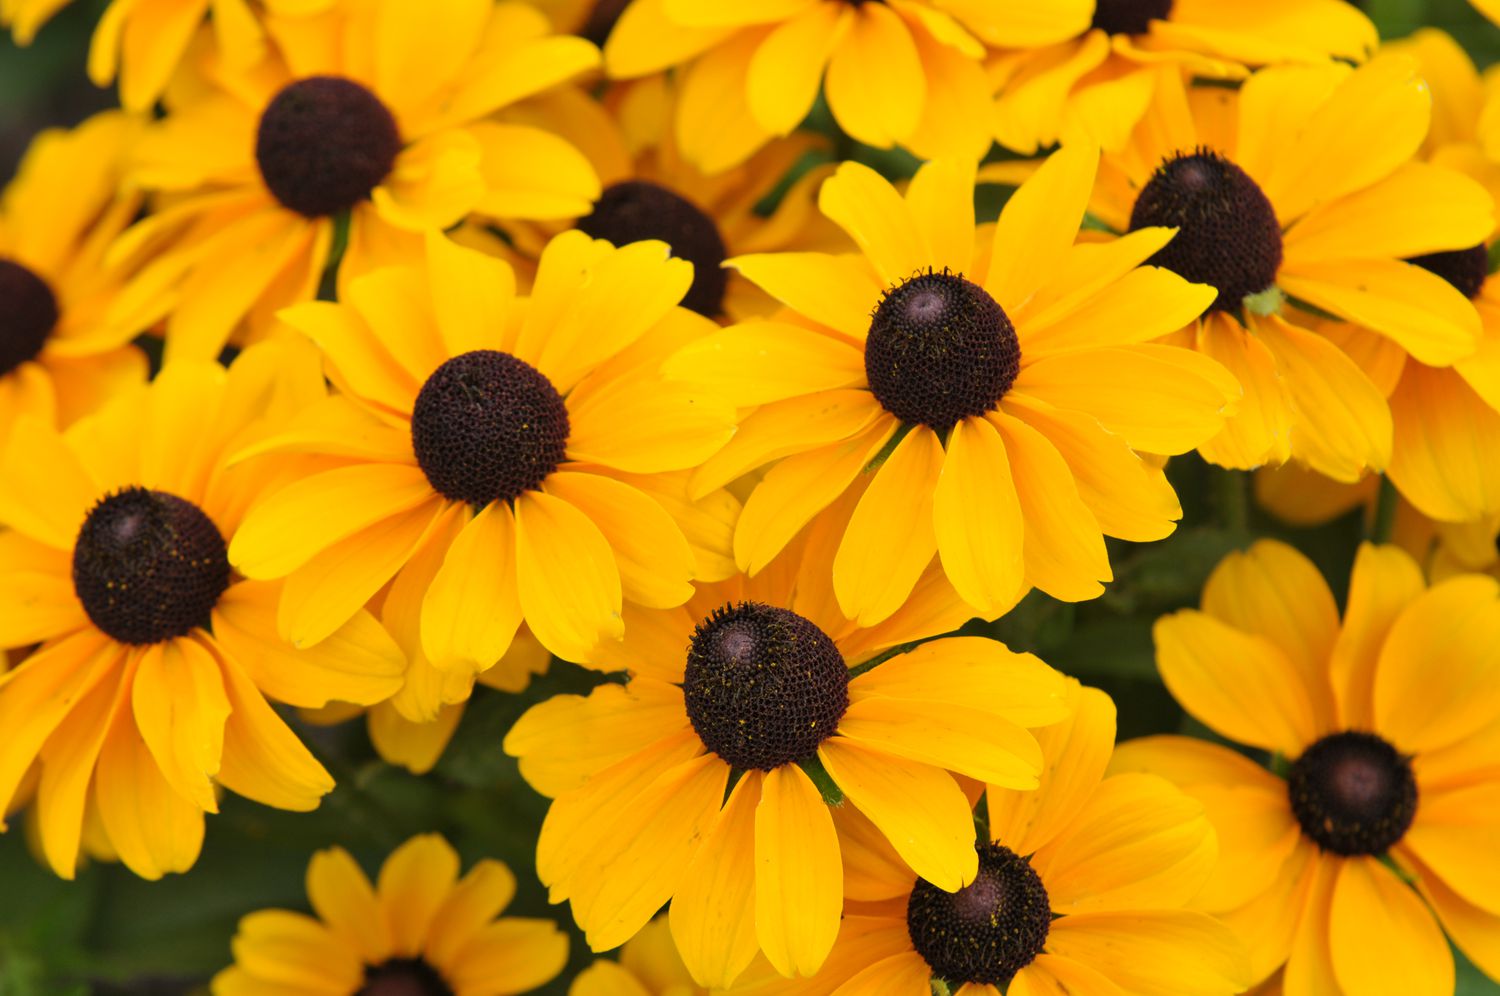 Black-eyed susan flowers with yellow petals and black centers closeup